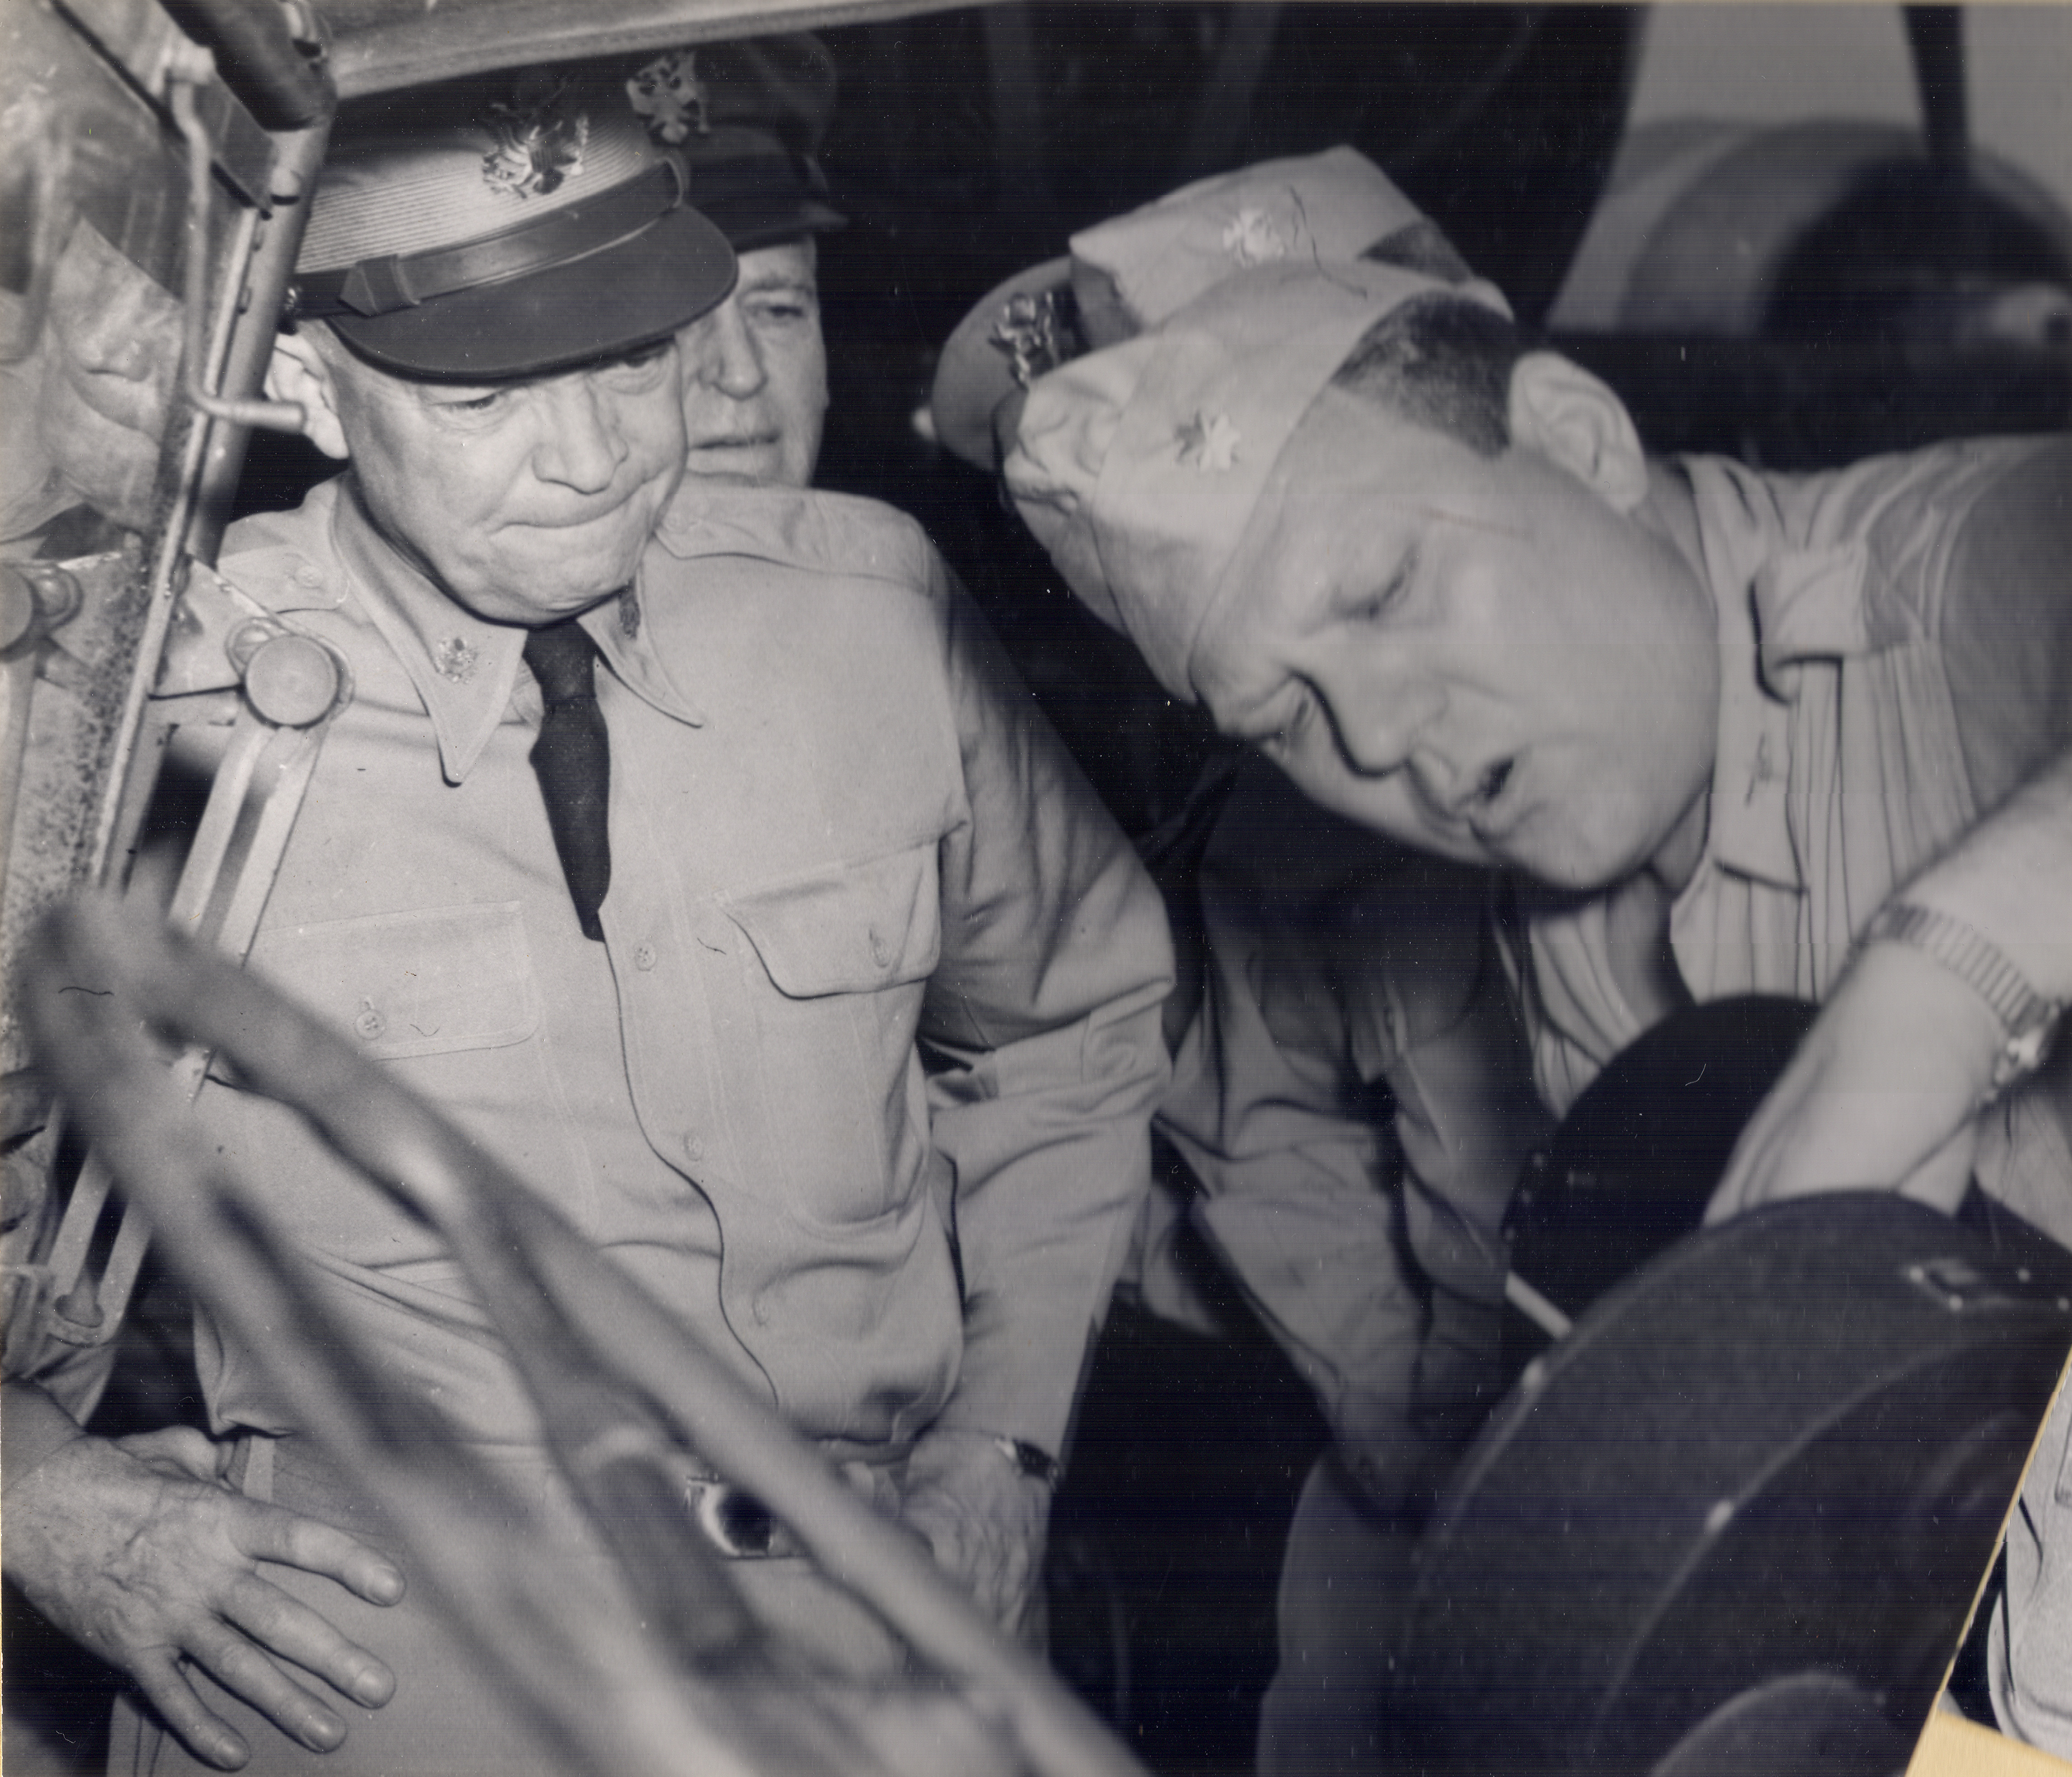 General Dwight Eisenhower and Major Perry M. Thomas, 1945-1946
